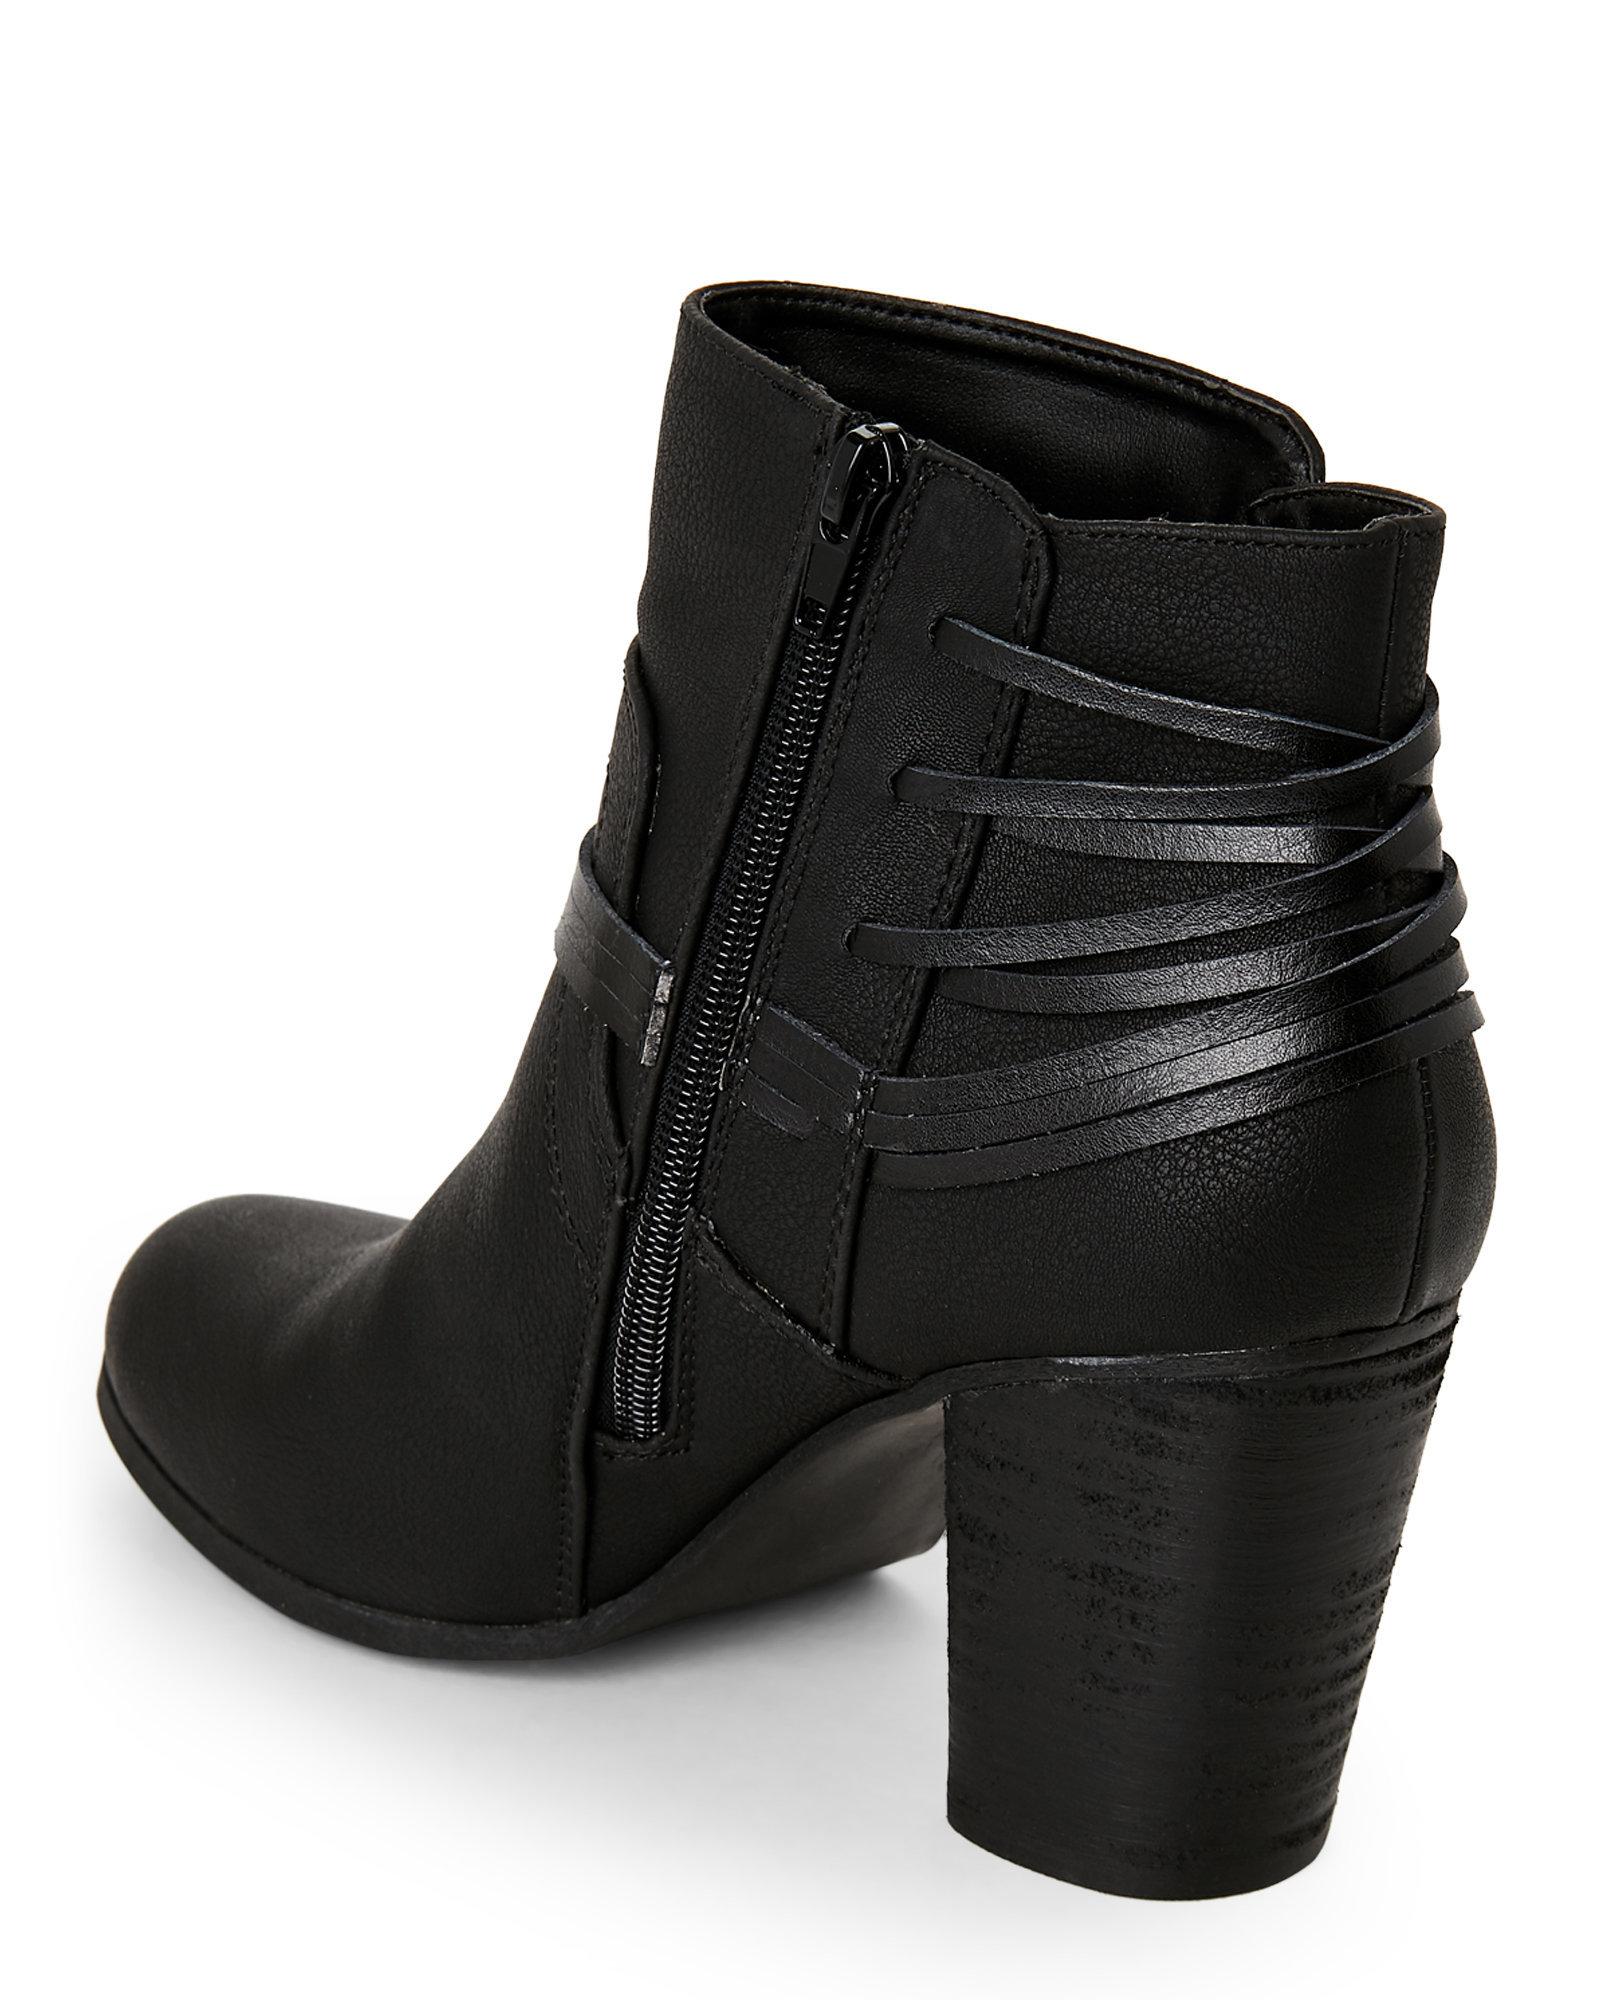 Madden Girl Black Denice Wrap Ankle Boots - Lyst